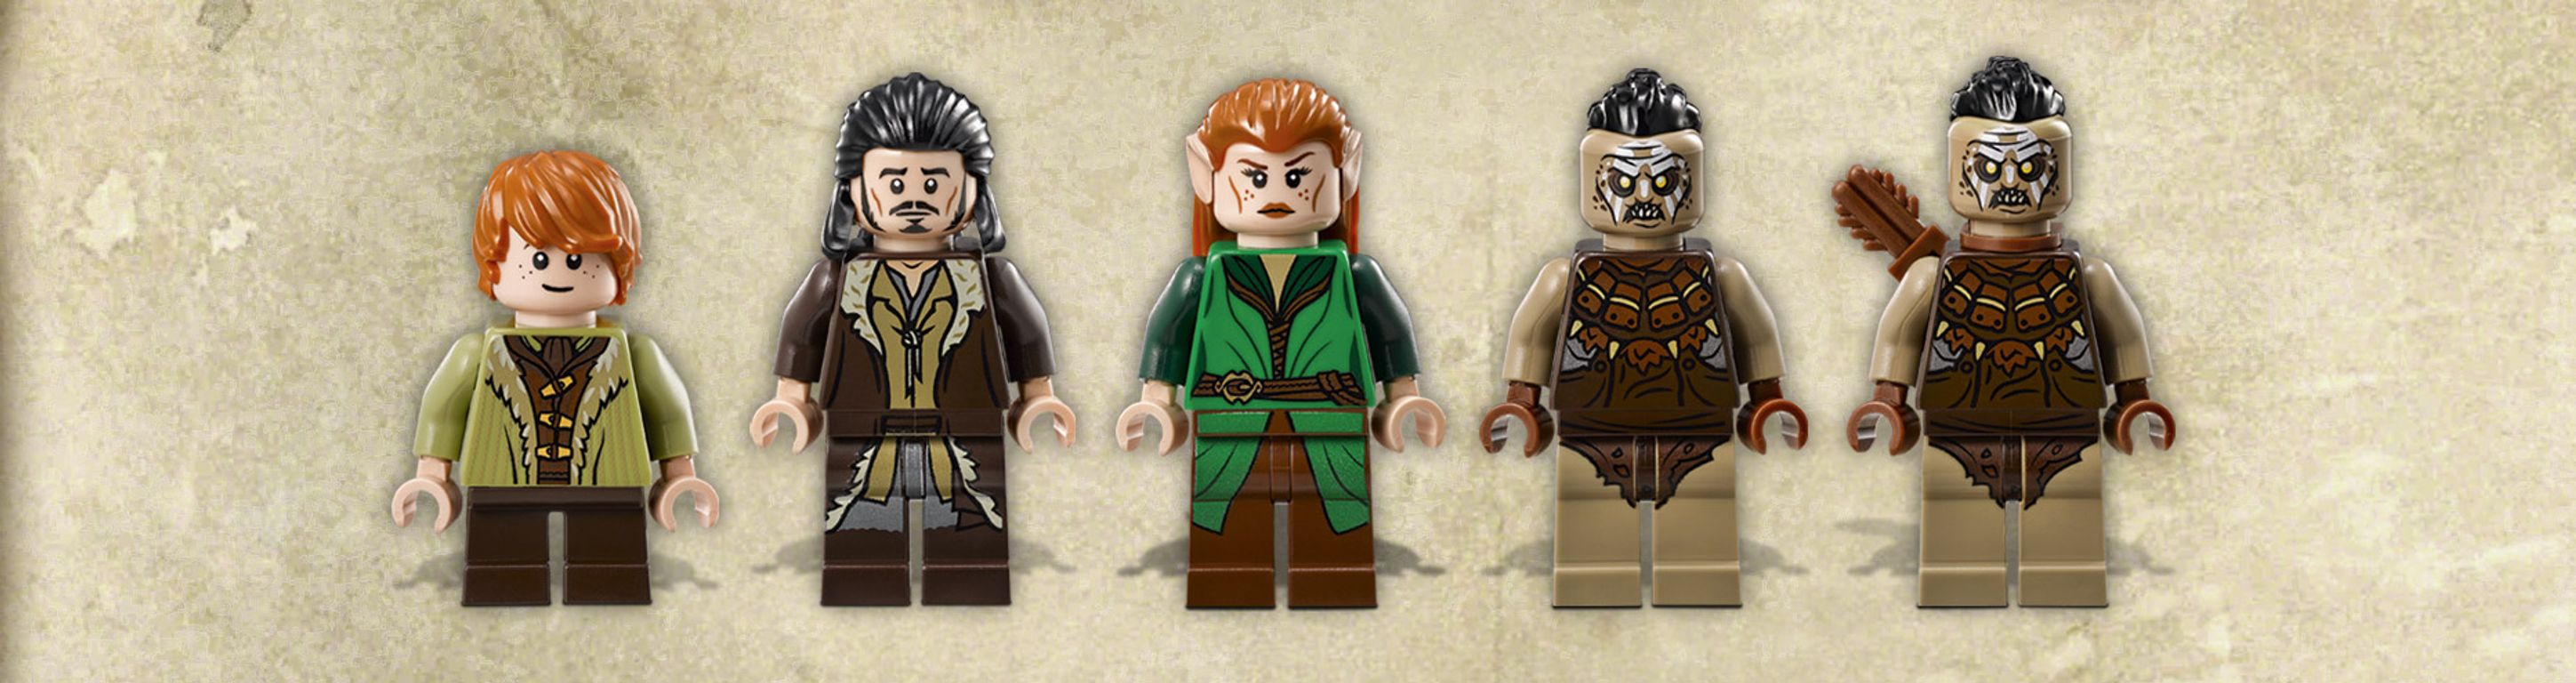 LEGO® The Hobbit Attack on Sea Town minifigures